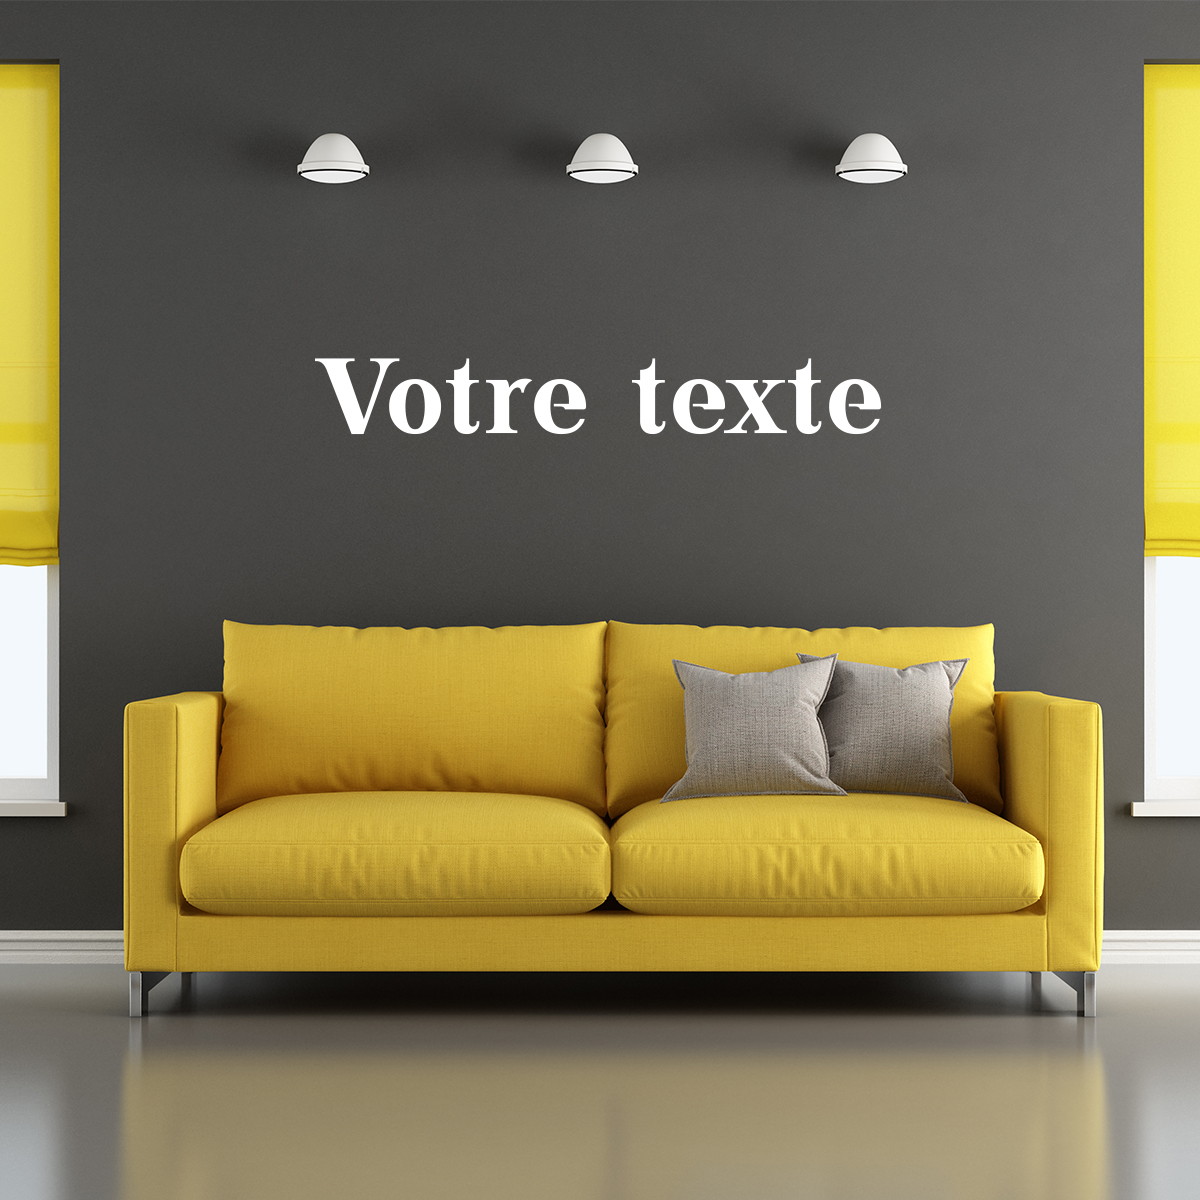 Wall sticker customisable text Classic divine